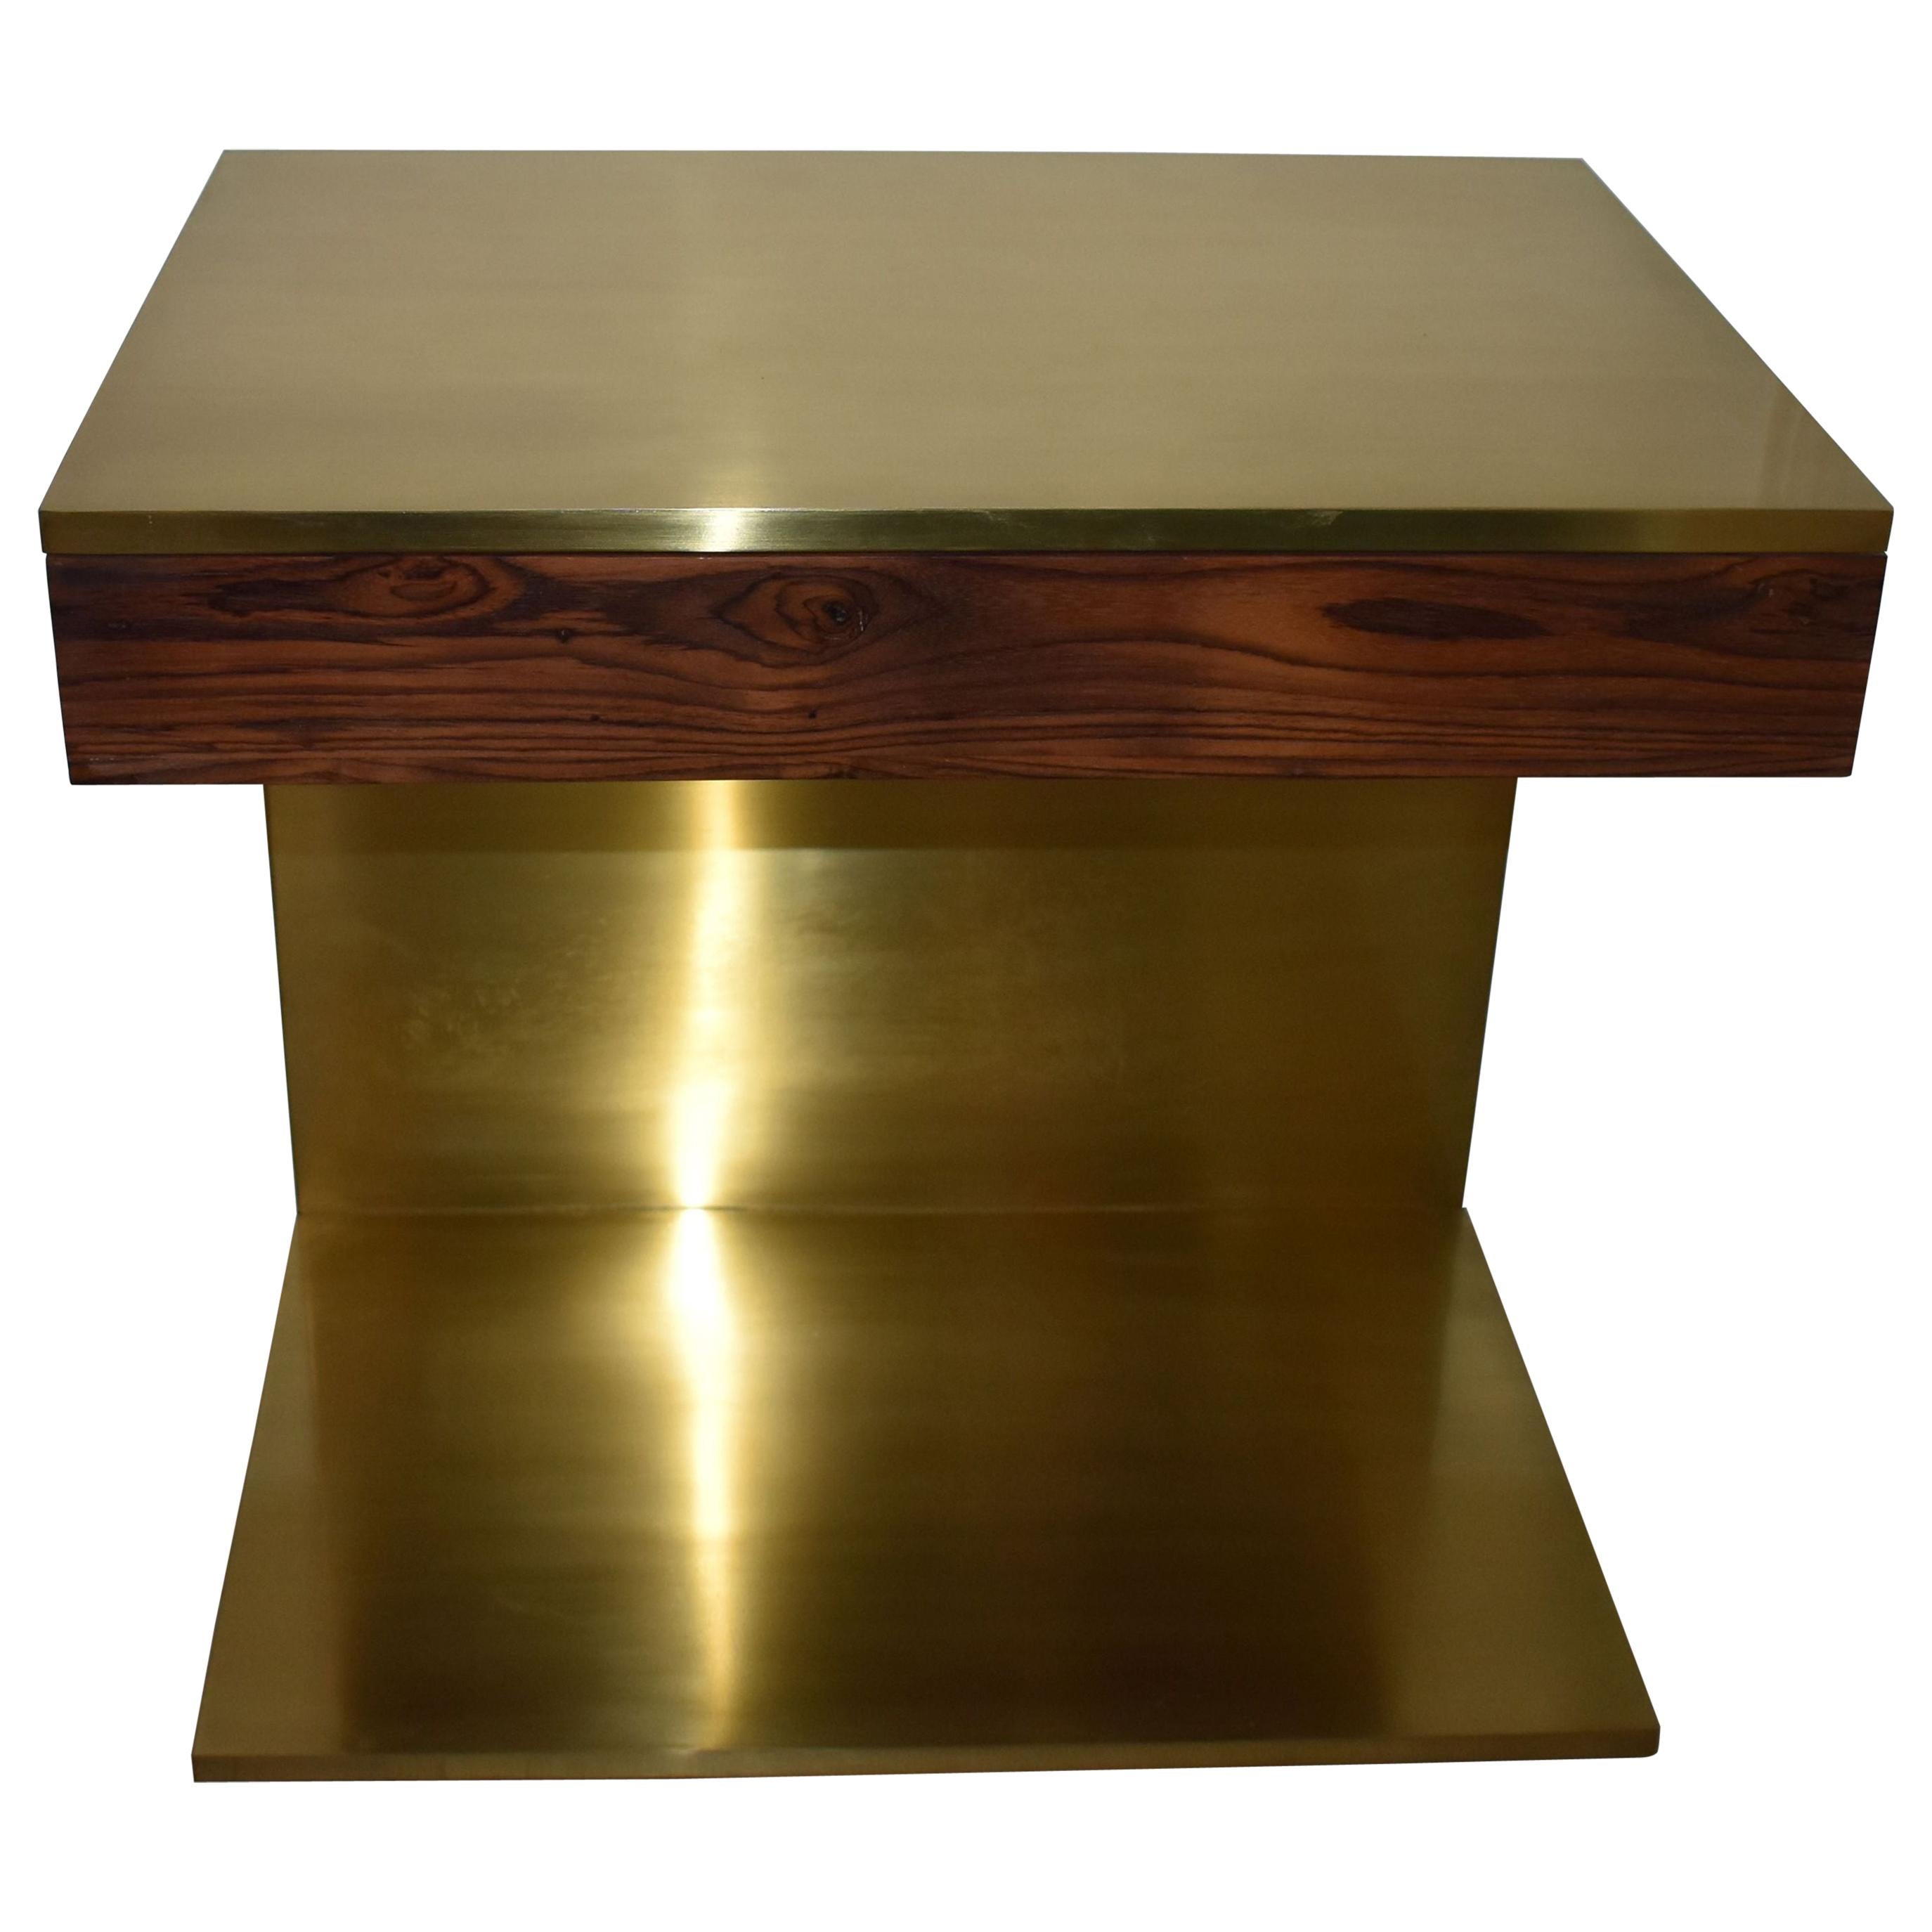 Single Rosewood & Solid Brass Side Table